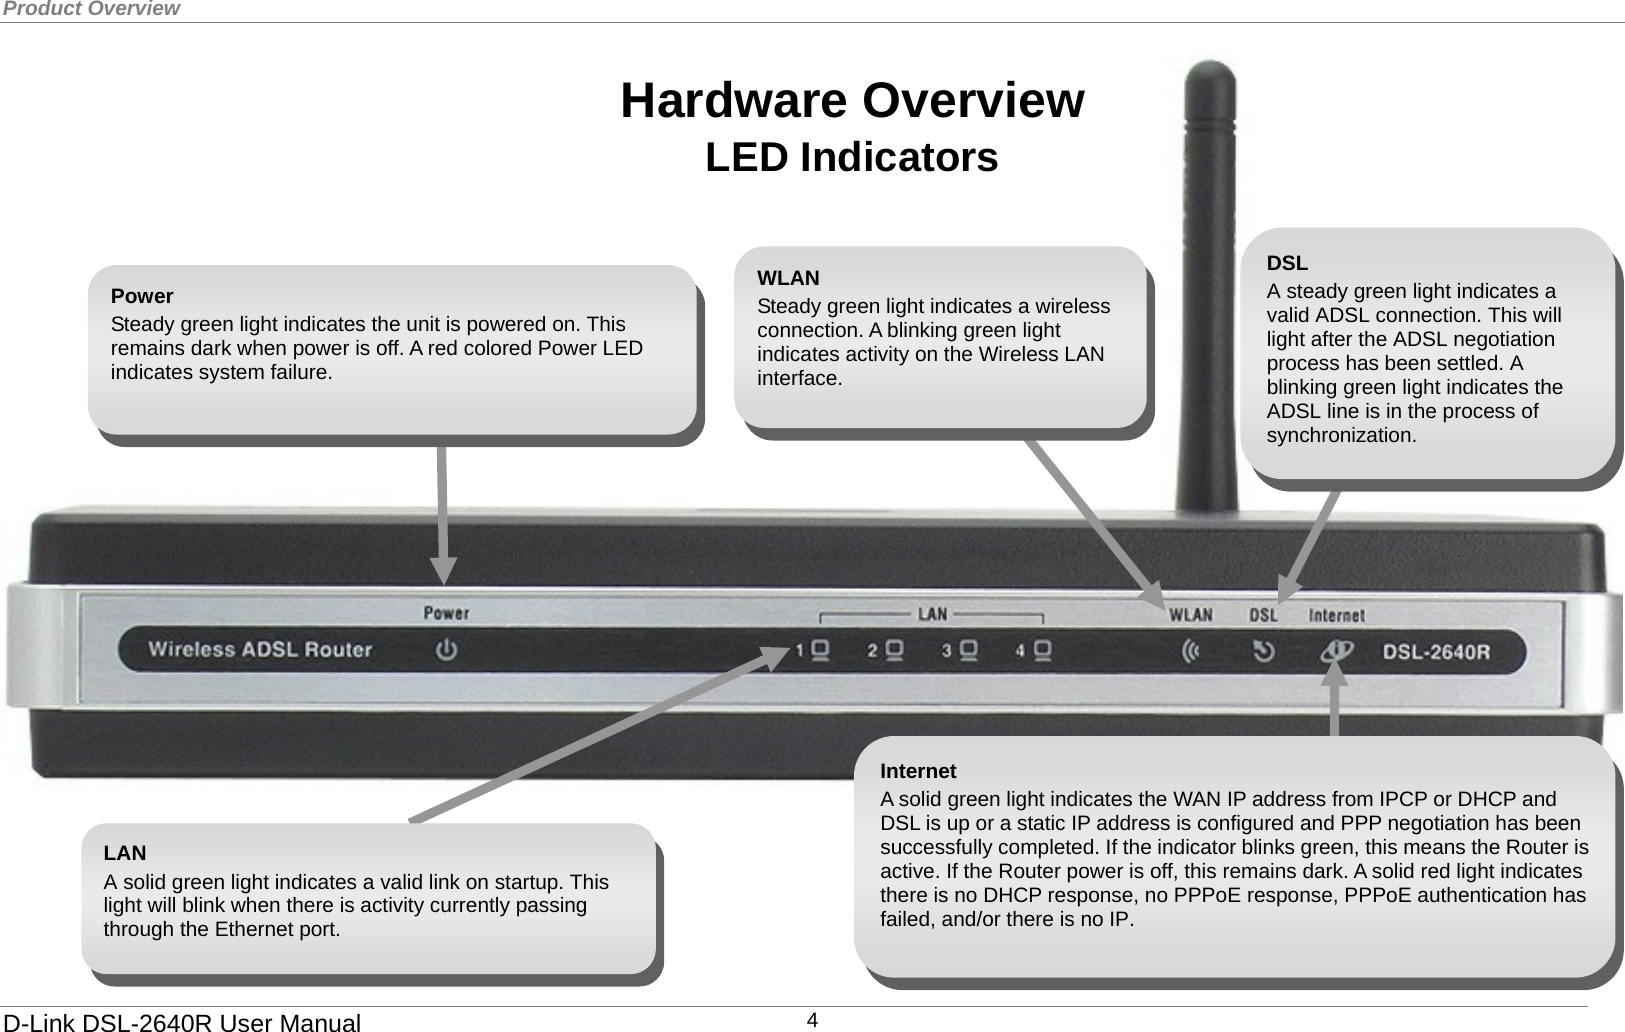 Product Overview  D-Link DSL-2640R User Manual                                      Hardware Overview LEDs                    Hardware Overview LED Indicators WLAN Steady green light indicates a wireless connection. A blinking green light indicates activity on the Wireless LAN interface. LAN  A solid green light indicates a valid link on startup. This light will blink when there is activity currently passing through the Ethernet port. DSL A steady green light indicates a valid ADSL connection. This will light after the ADSL negotiation process has been settled. A blinking green light indicates the ADSL line is in the process of synchronization. Internet A solid green light indicates the WAN IP address from IPCP or DHCP and DSL is up or a static IP address is configured and PPP negotiation has been successfully completed. If the indicator blinks green, this means the Router is active. If the Router power is off, this remains dark. A solid red light indicates there is no DHCP response, no PPPoE response, PPPoE authentication has failed, and/or there is no IP. Power Steady green light indicates the unit is powered on. This remains dark when power is off. A red colored Power LED indicates system failure. 4